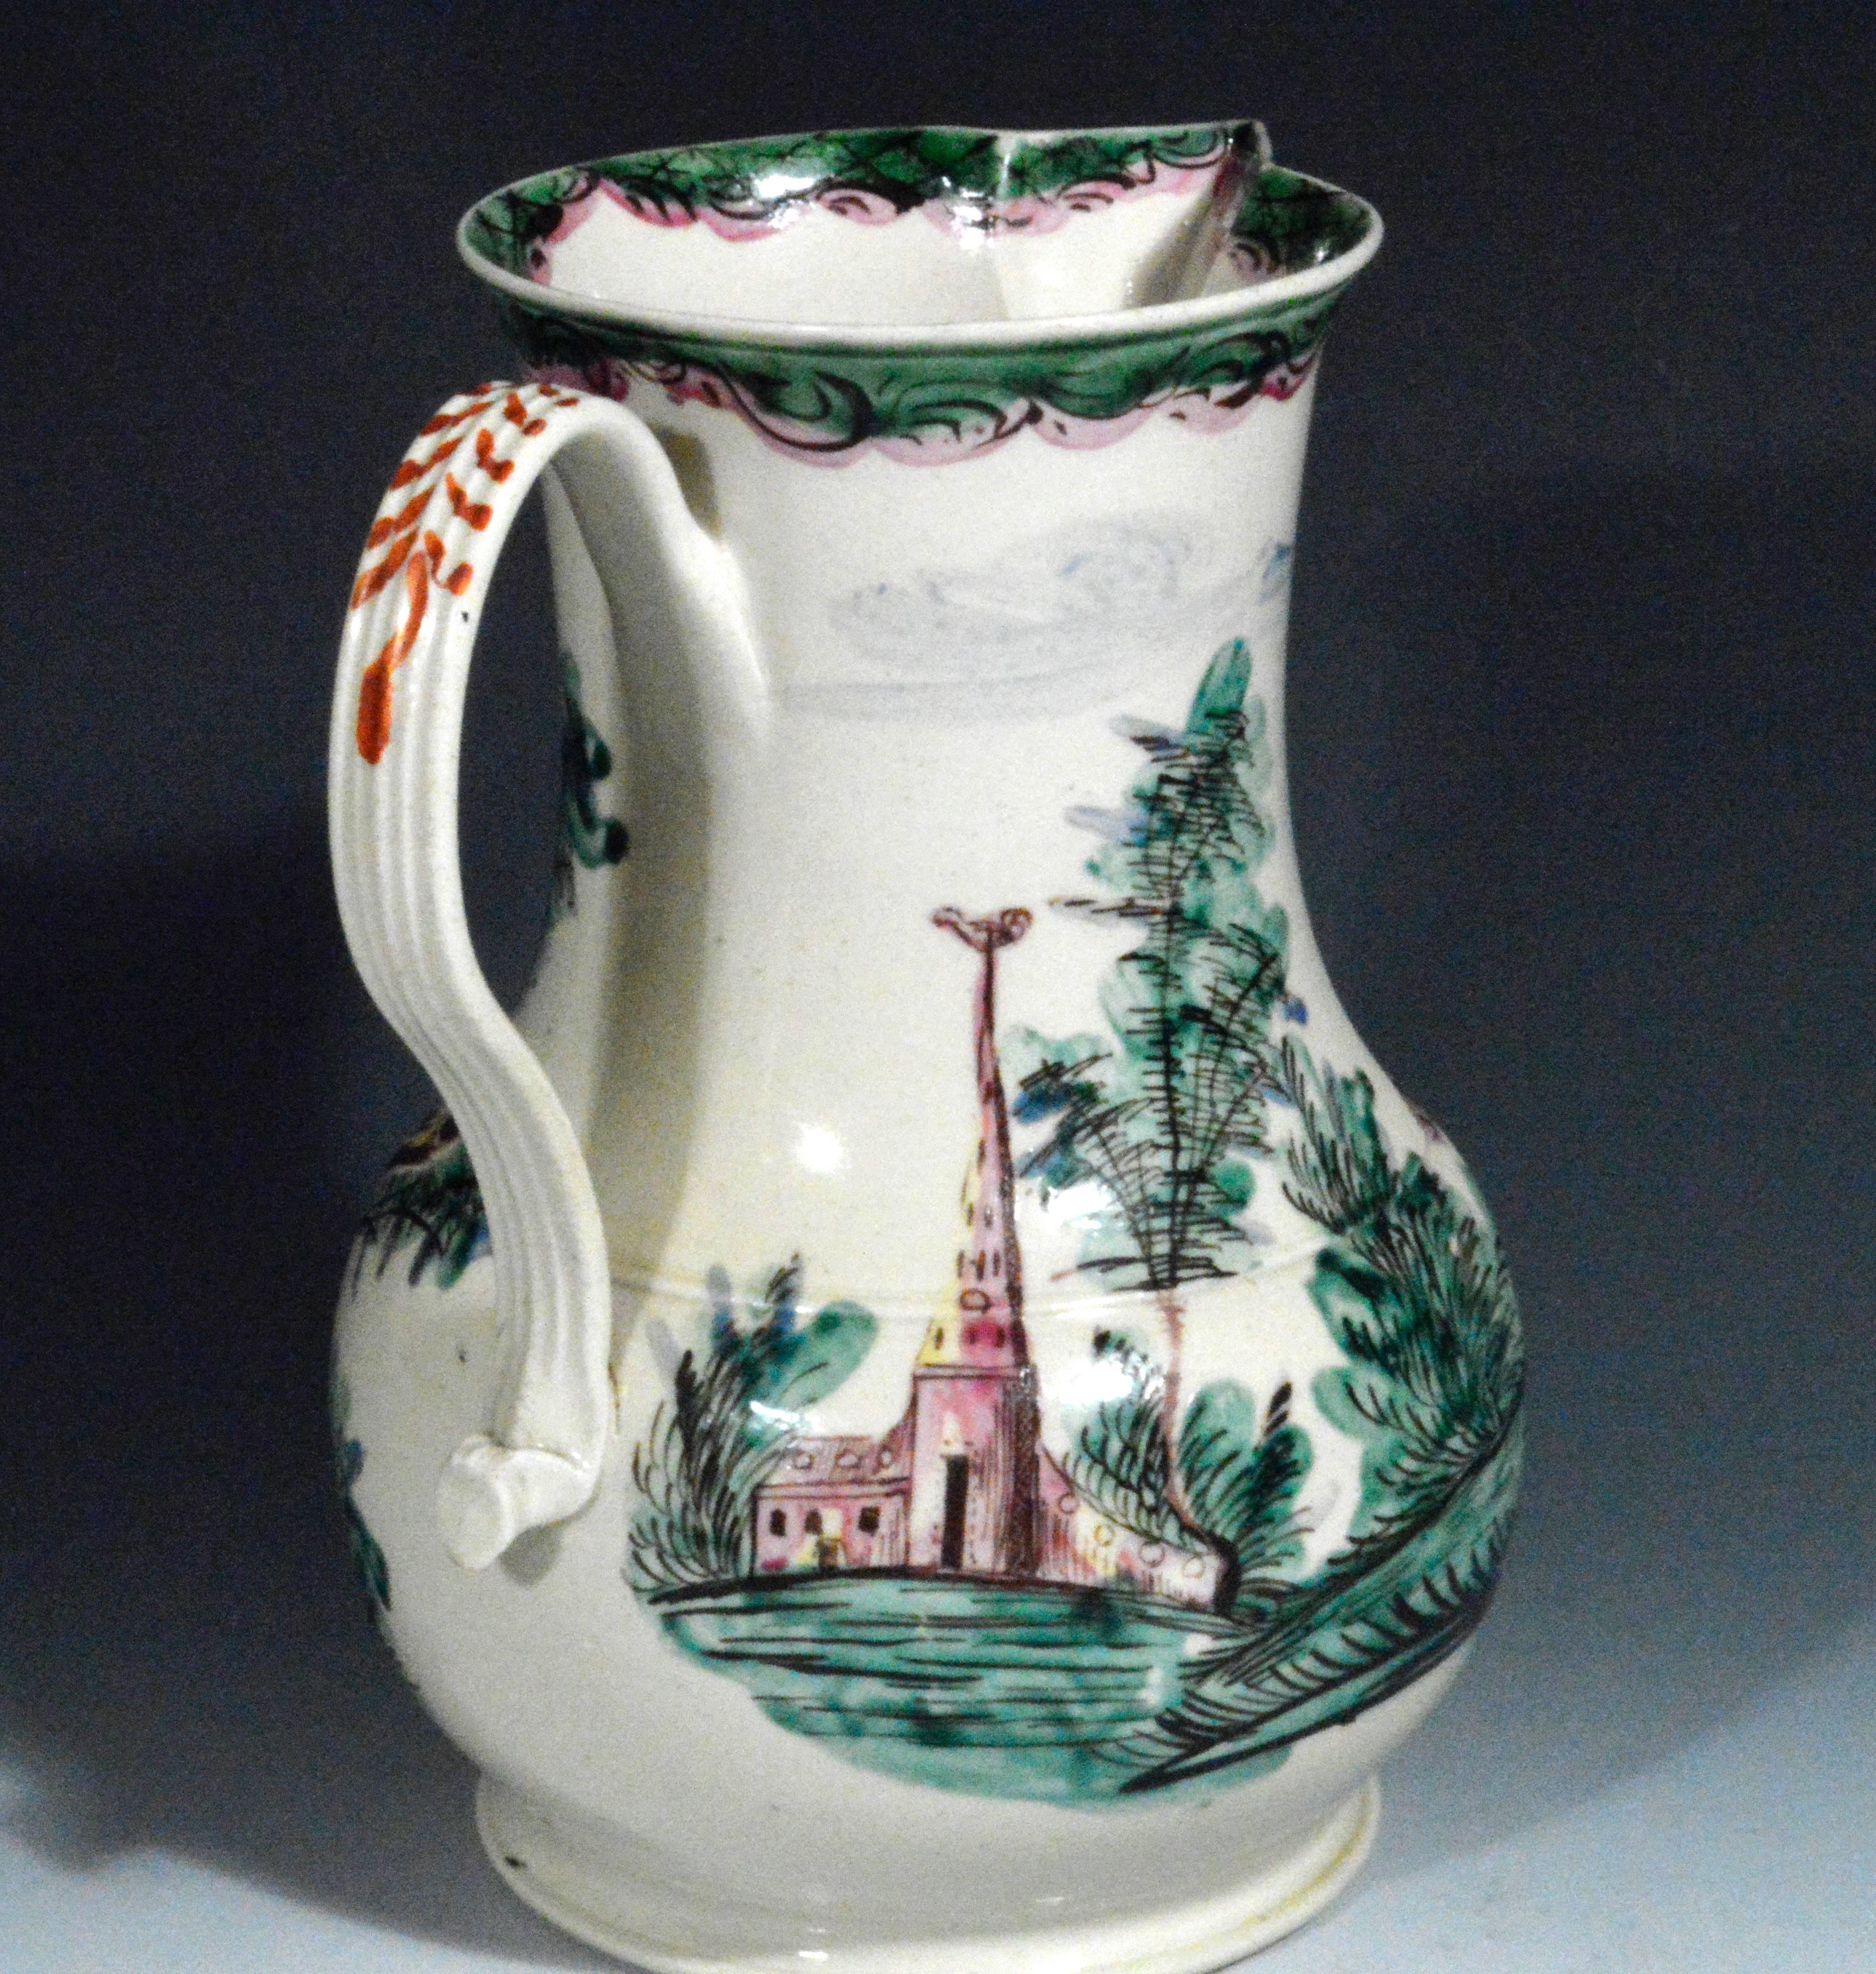 Salt glazed cider jug with polychrome decoration,
circa 1765

The jug is painted in colorful enamels with a courting couple in a tree-filled landscape, a church to one side with a weathercock on its tall spire and a smaller building to the other